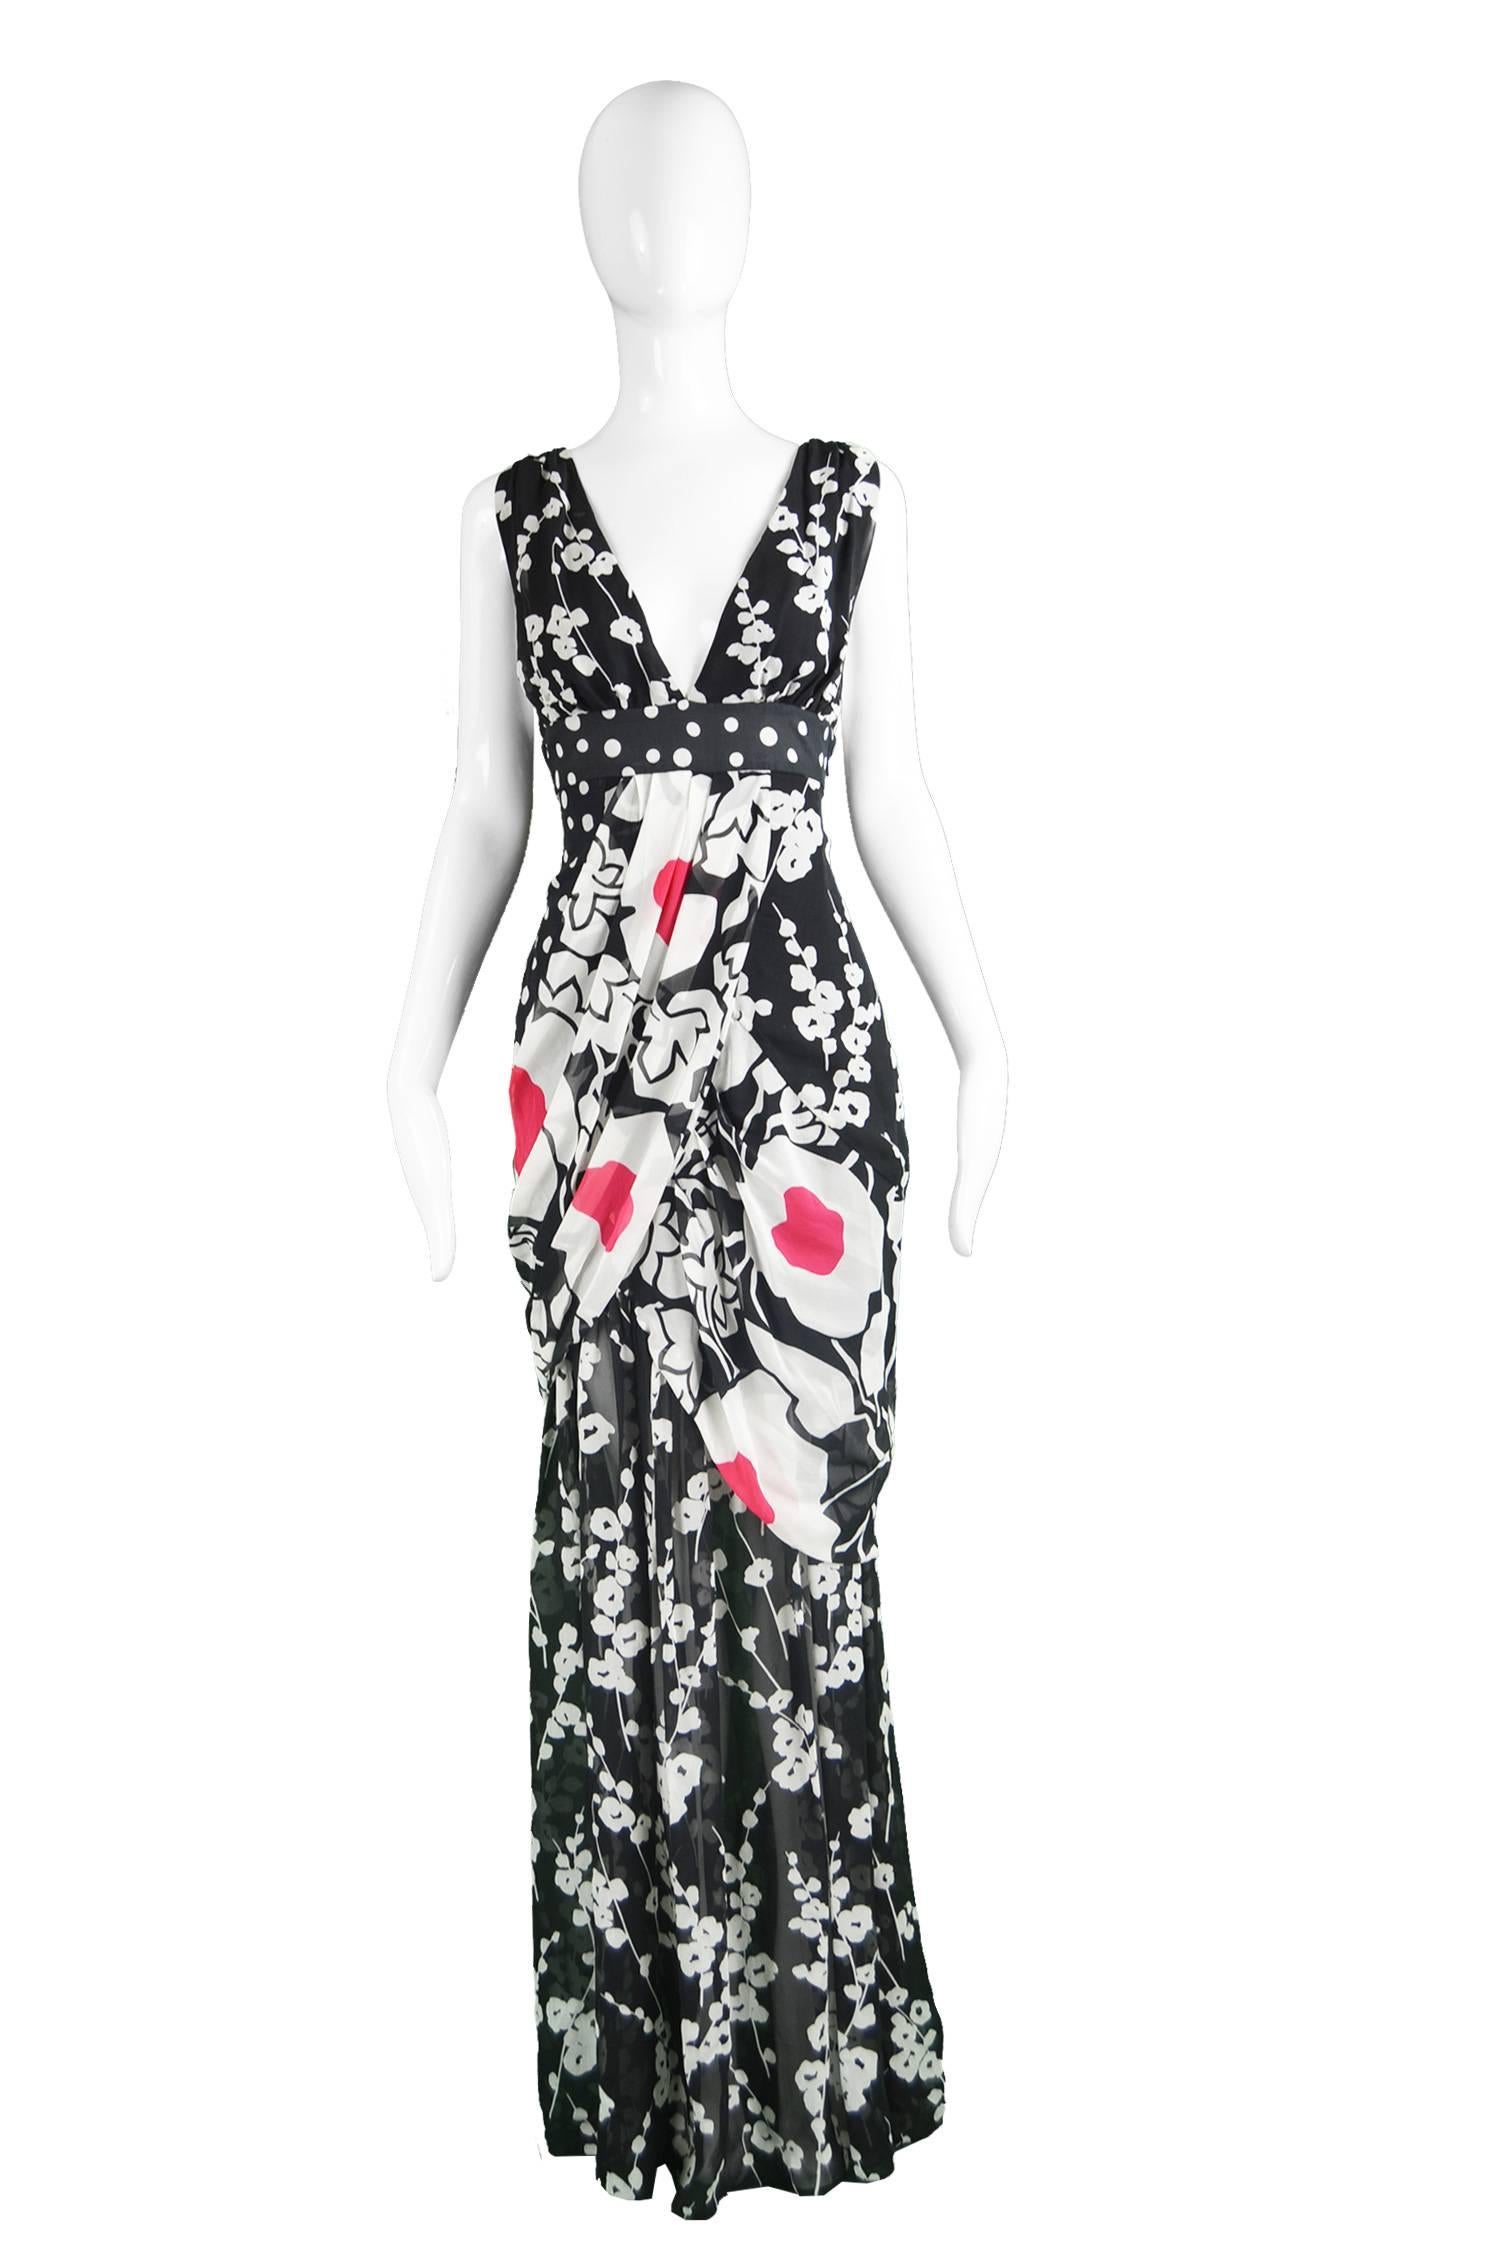 Kenzo Black & White Draped Floral Polka Dot Silk Chiffon Maxi Dress

A stunning Kenzo maxi dress in a black and white silk chiffon with polka dots in panels and a bold Japanese / Asian inspired floral print in others. The silhouette is so